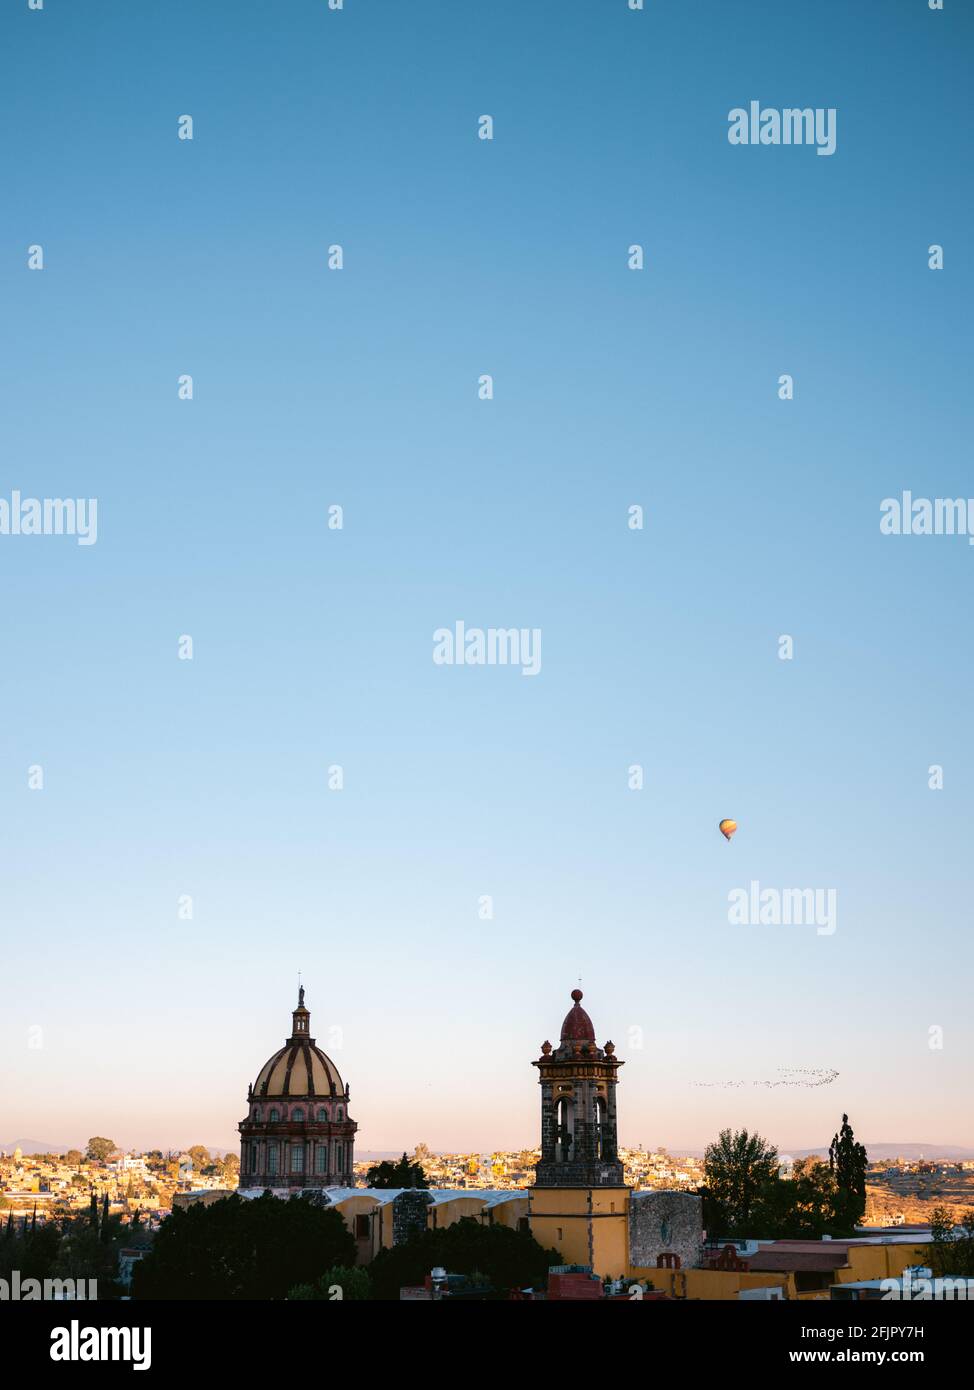 Hot air balloons above the city of San Miguel de Allende, Mexico around sunrise. Colorful travel photography image. Stock Photo